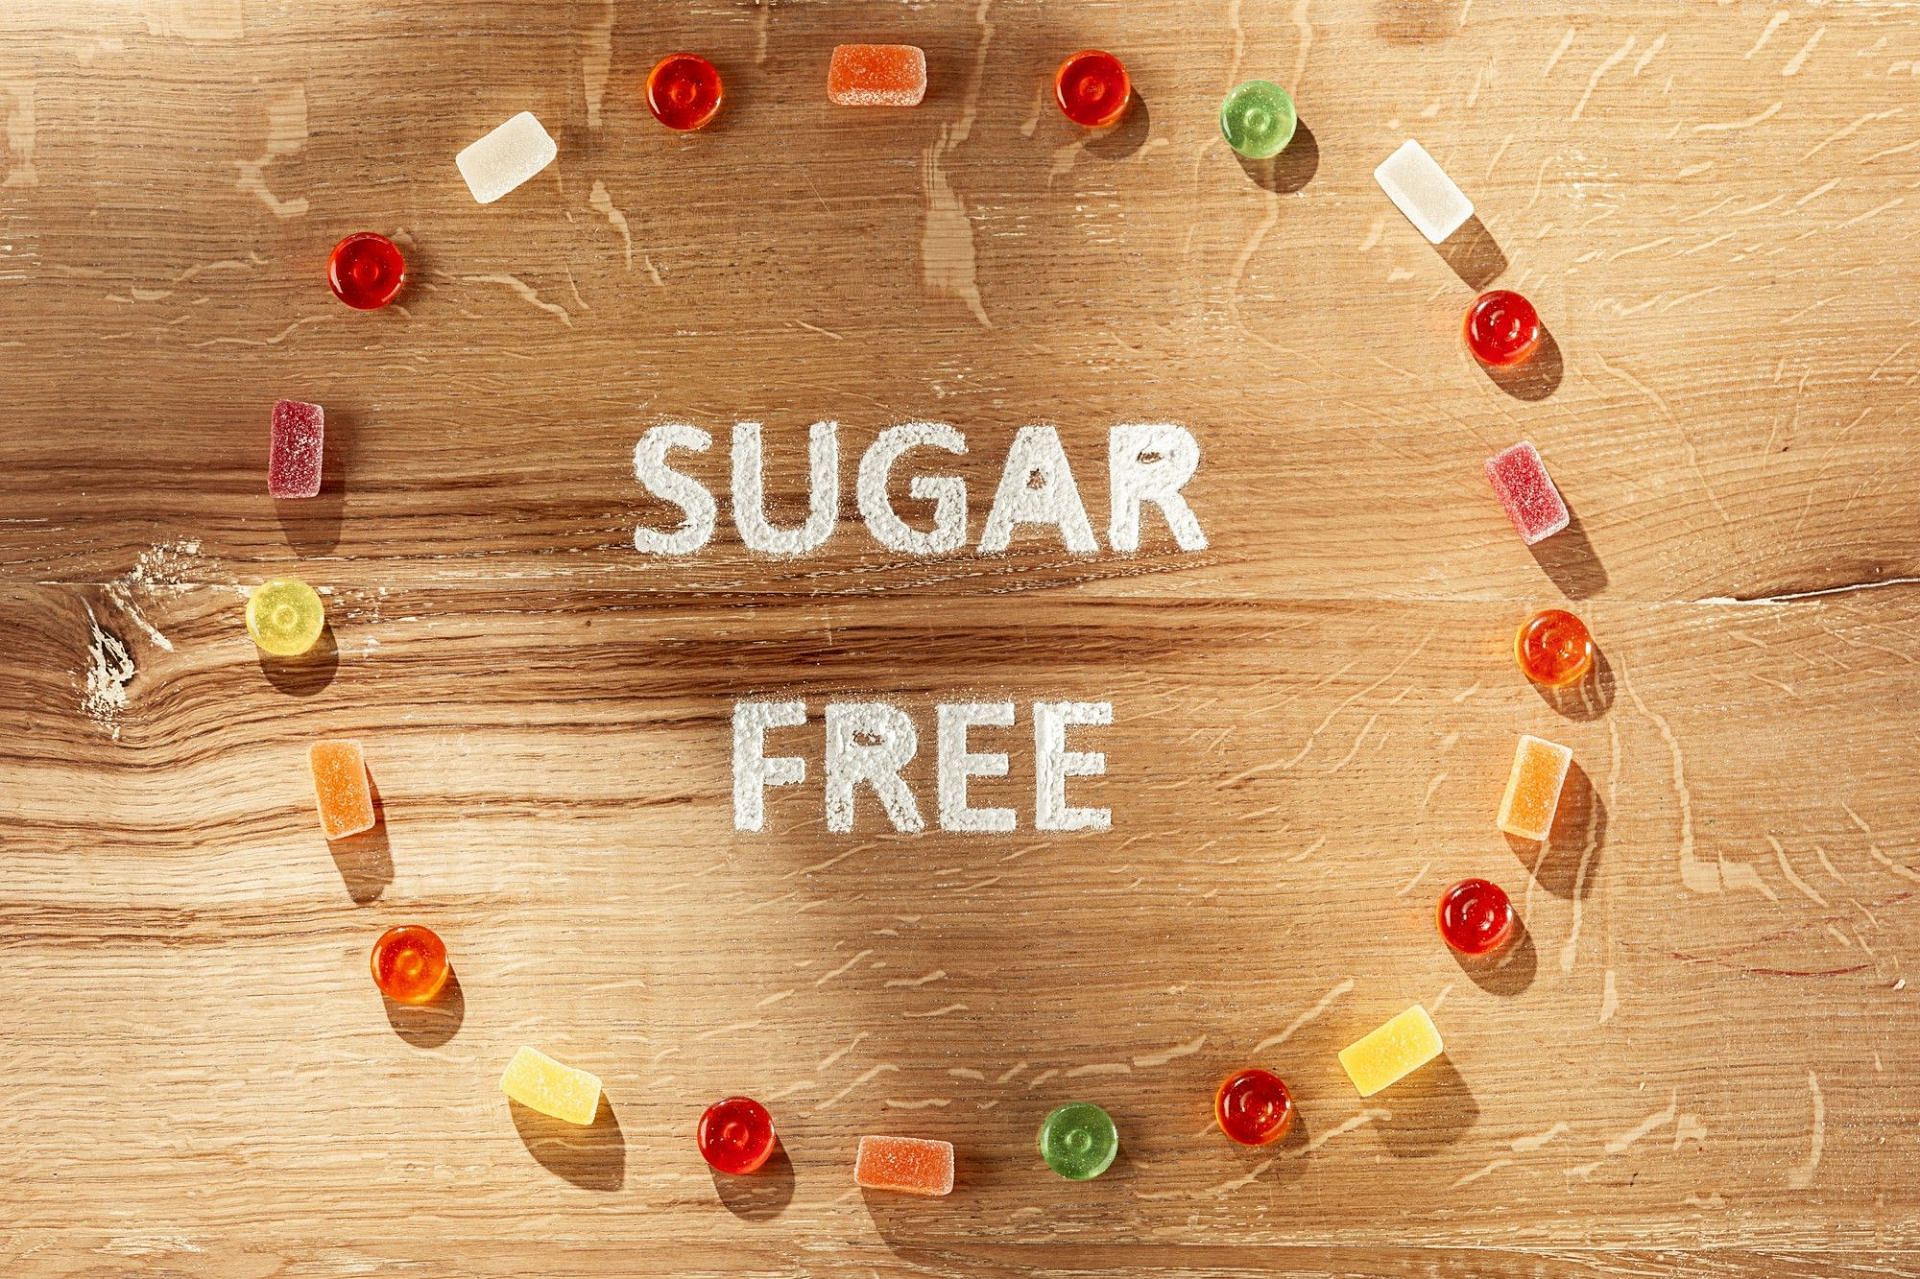 Try artificial sweeteners like sugar-free or stevia (Image by master1305 on Freepik)